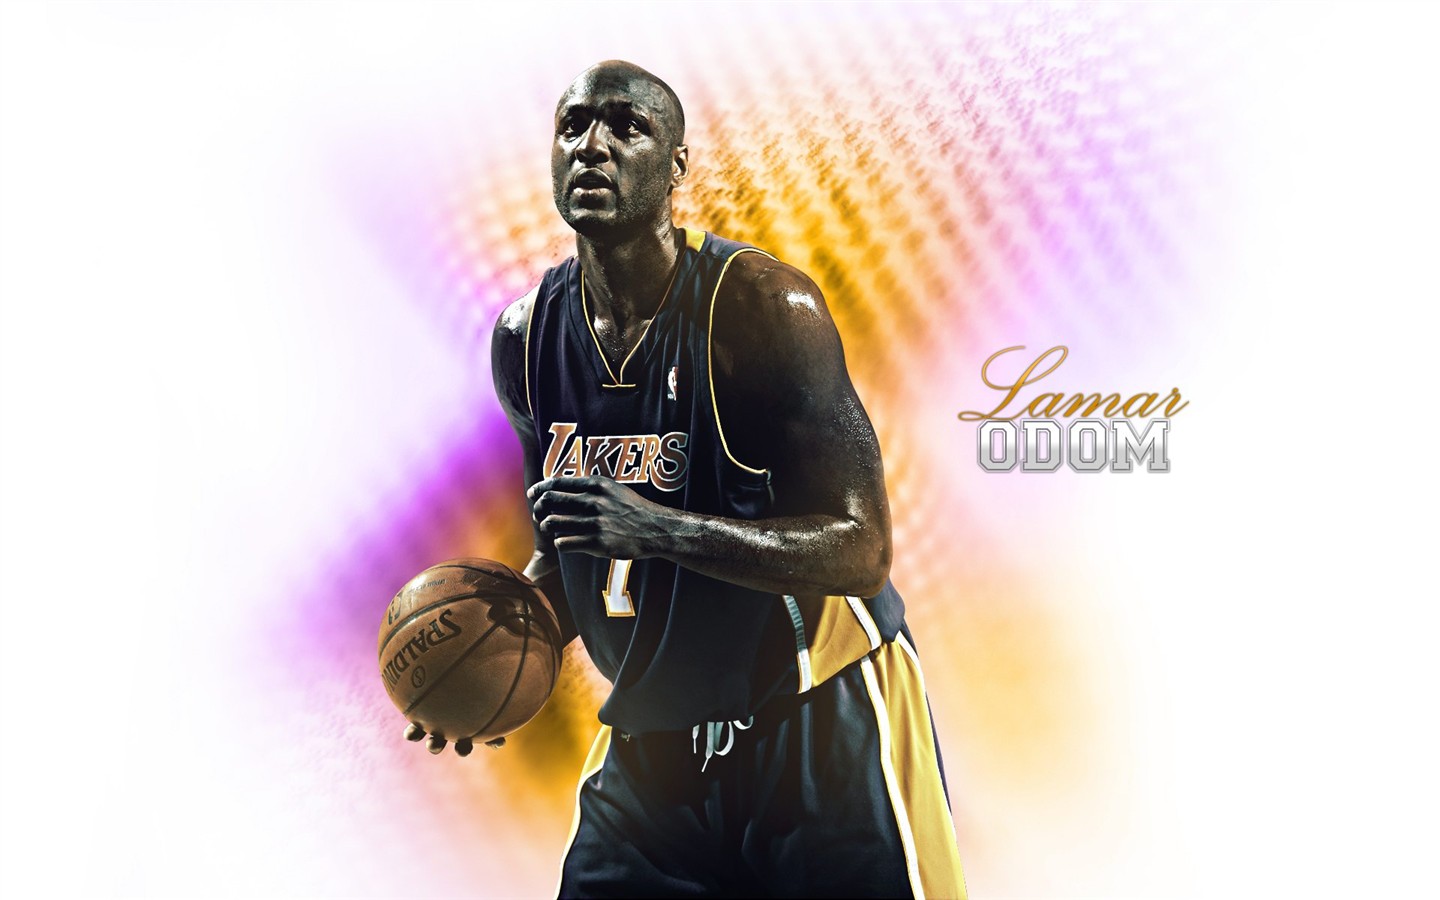 Los Angeles Lakers Official Wallpaper #17 - 1440x900